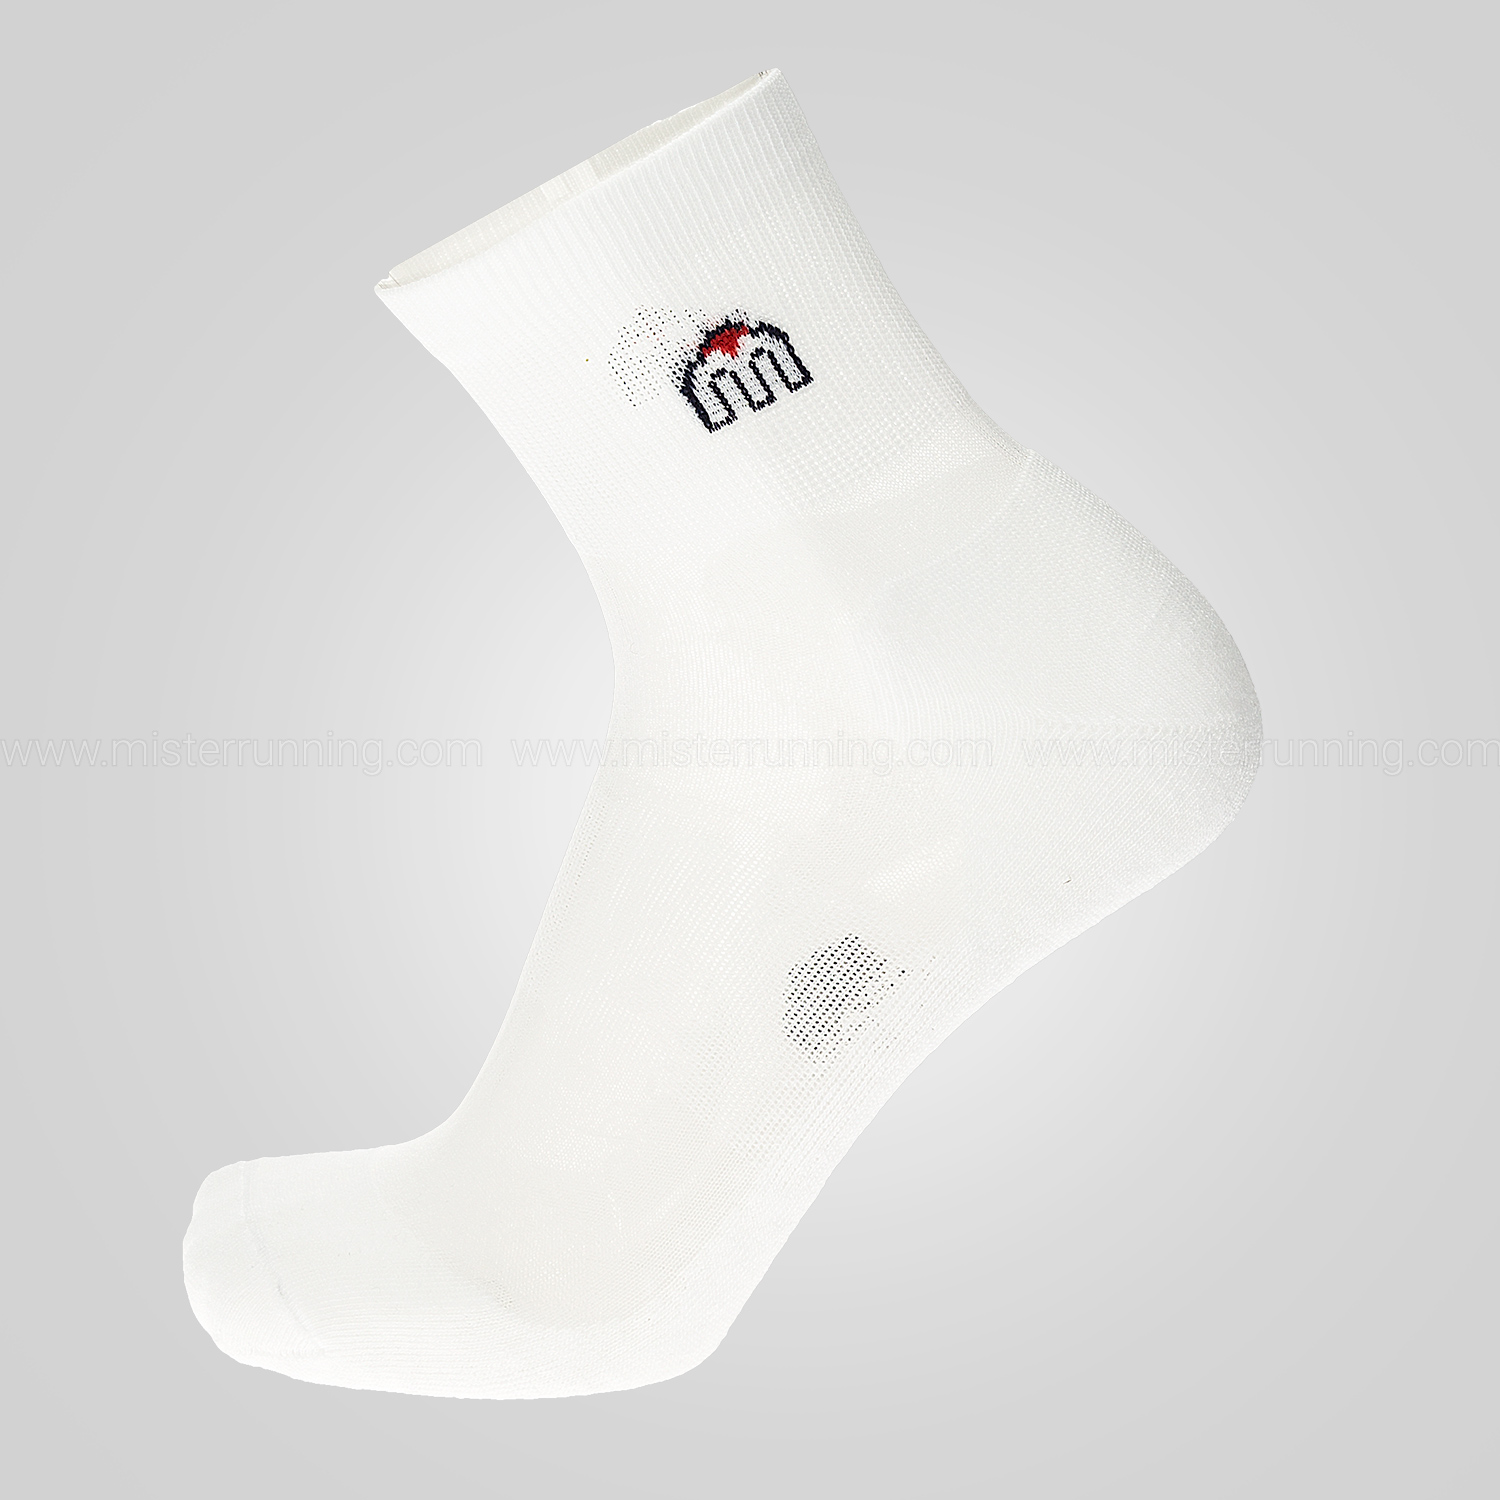 Mico Extra Dry x 2 Calcetines - Bianco